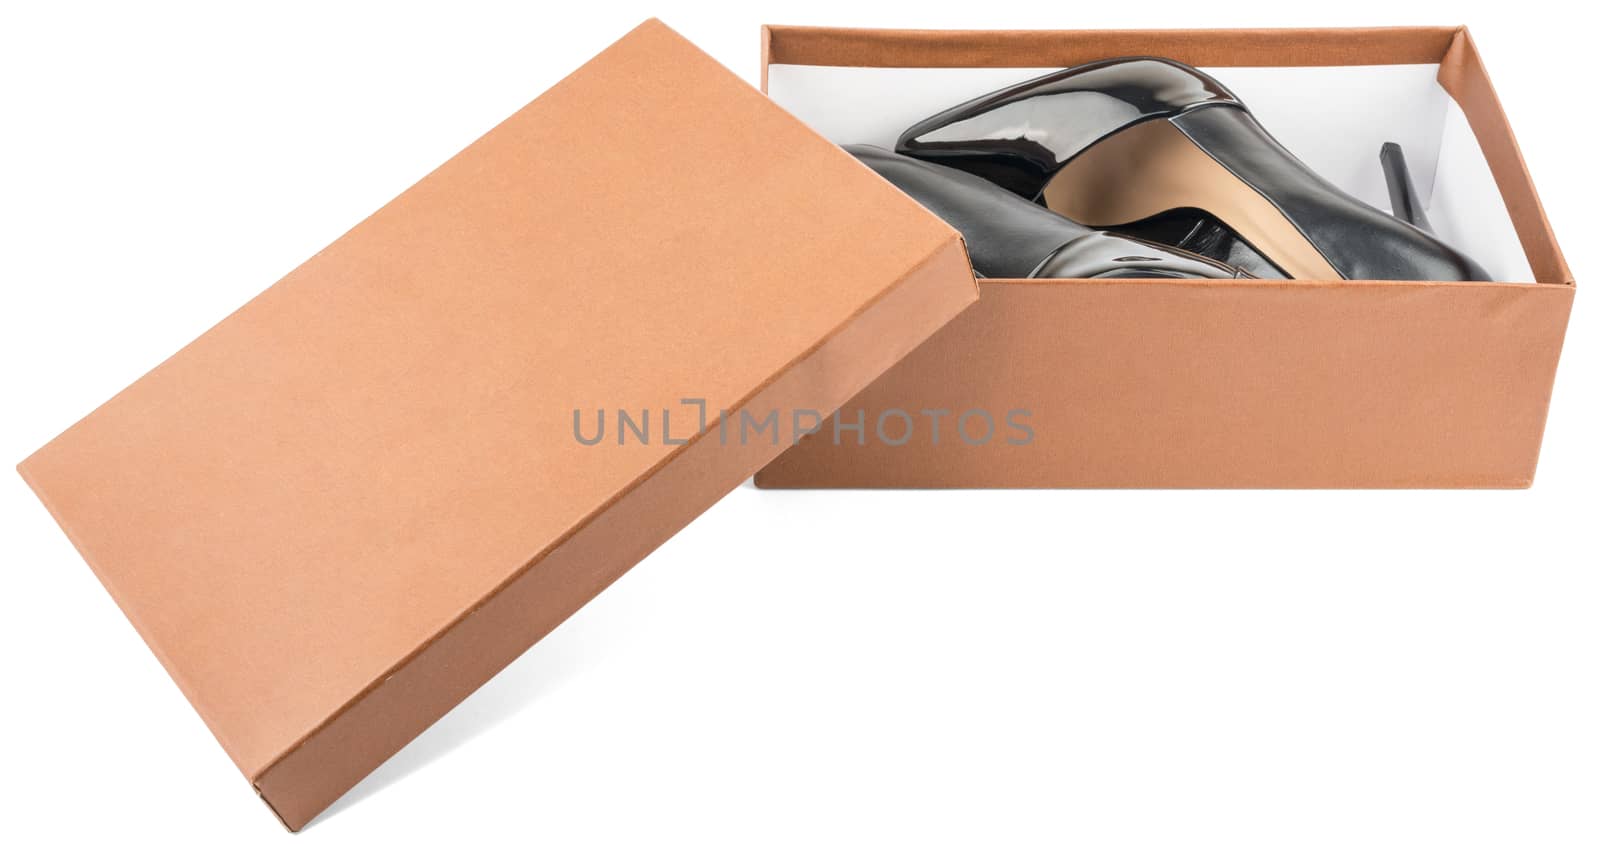 New black leather high heel shoes in box isolated on white background